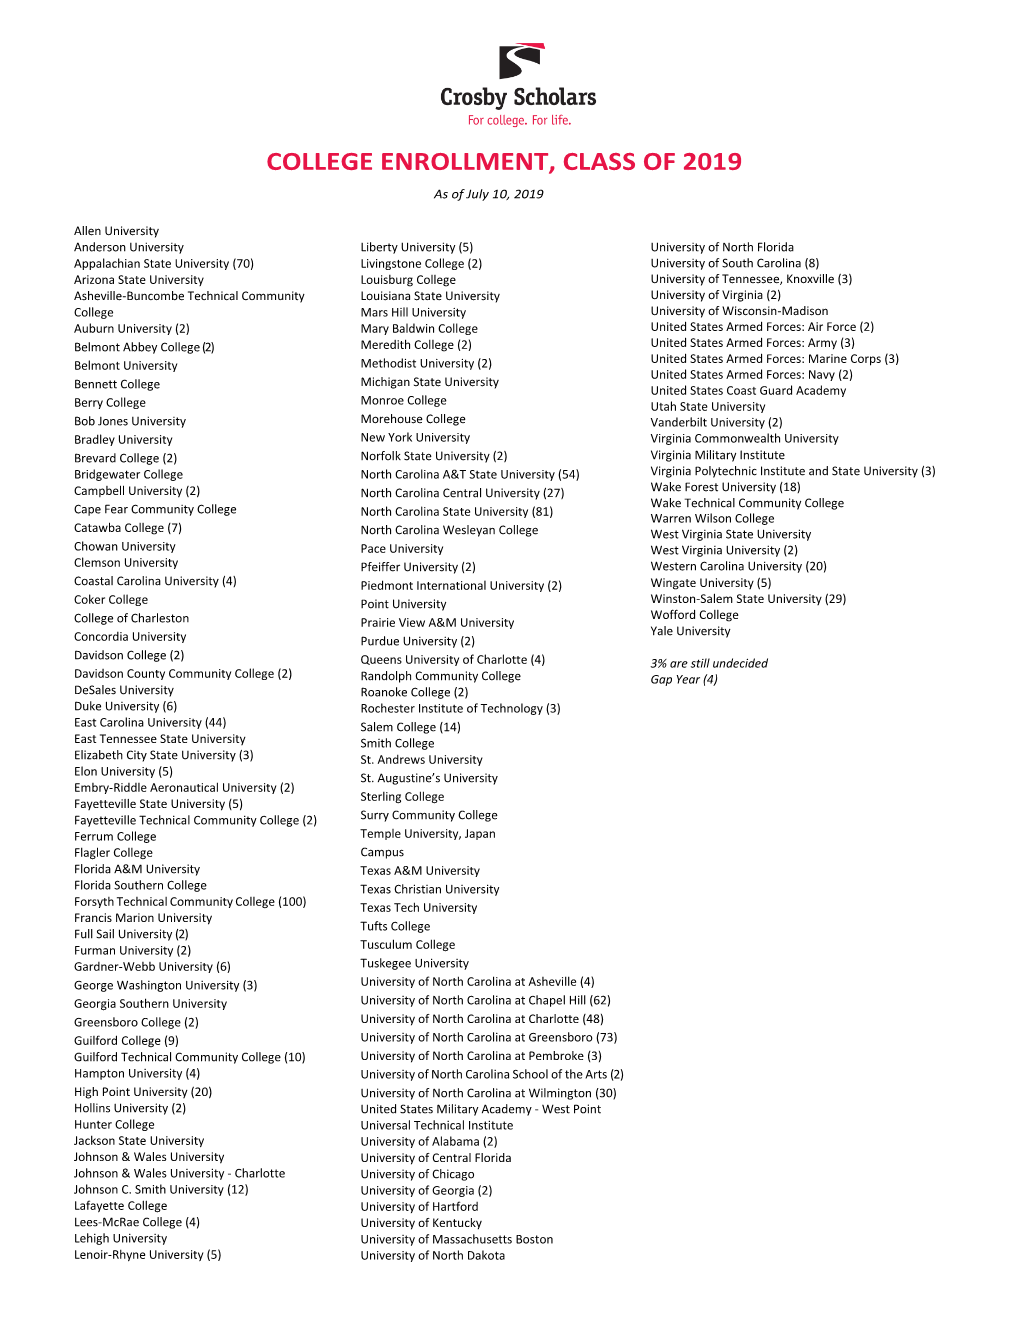 COLLEGE ENROLLMENT, CLASS of 2019 As of July 10, 2019